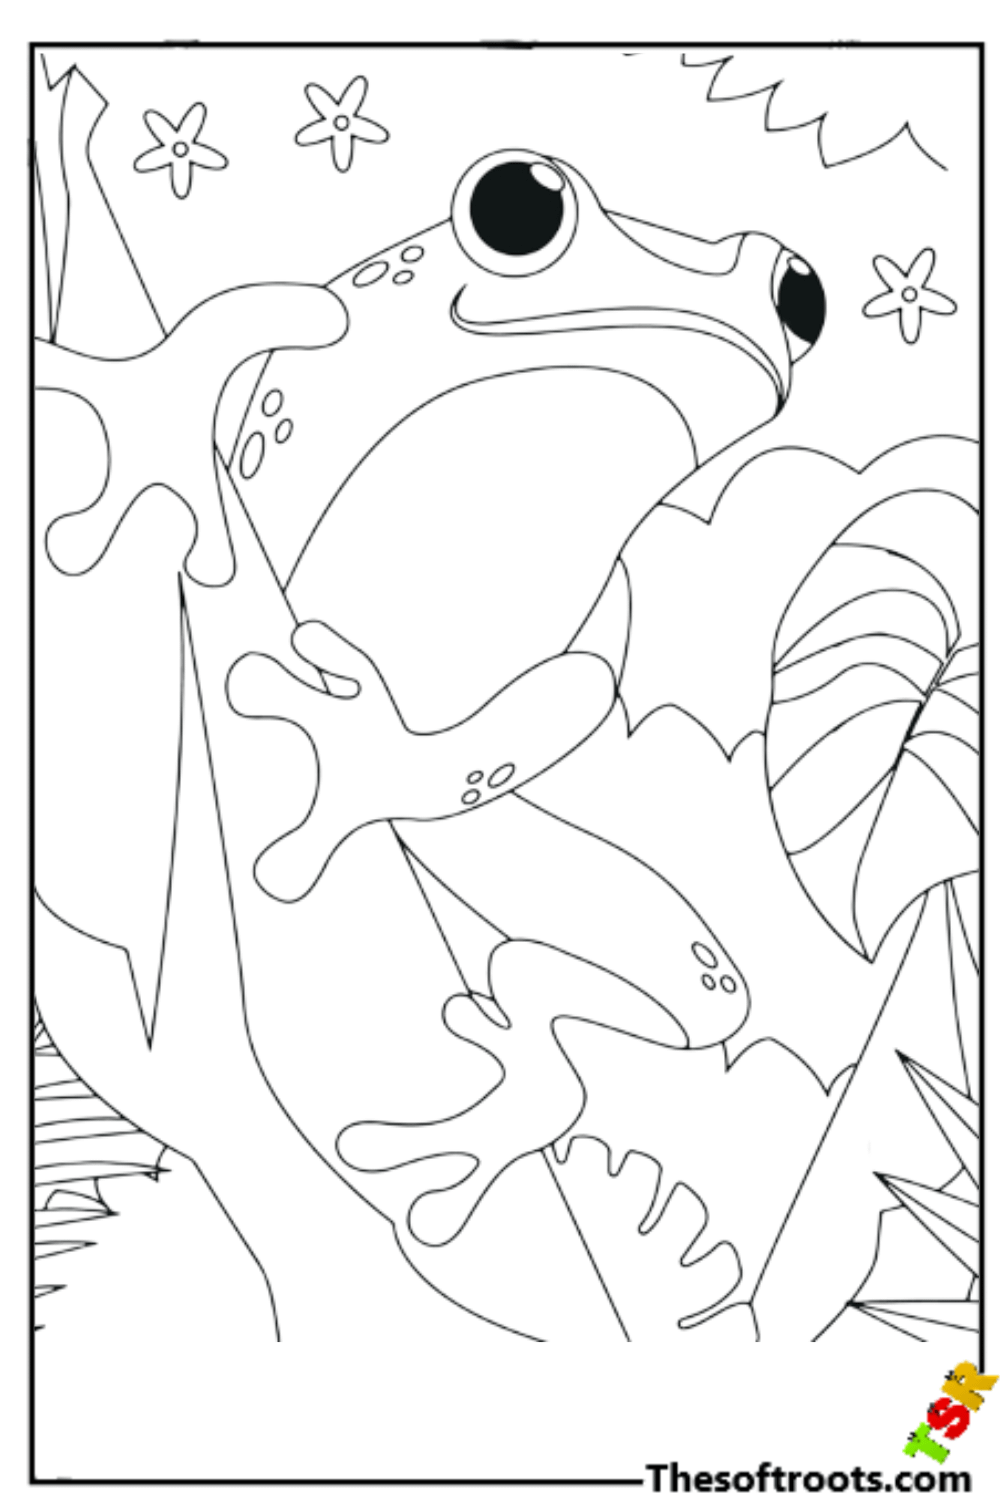 Frog coloring sheets rkidscoloringpages